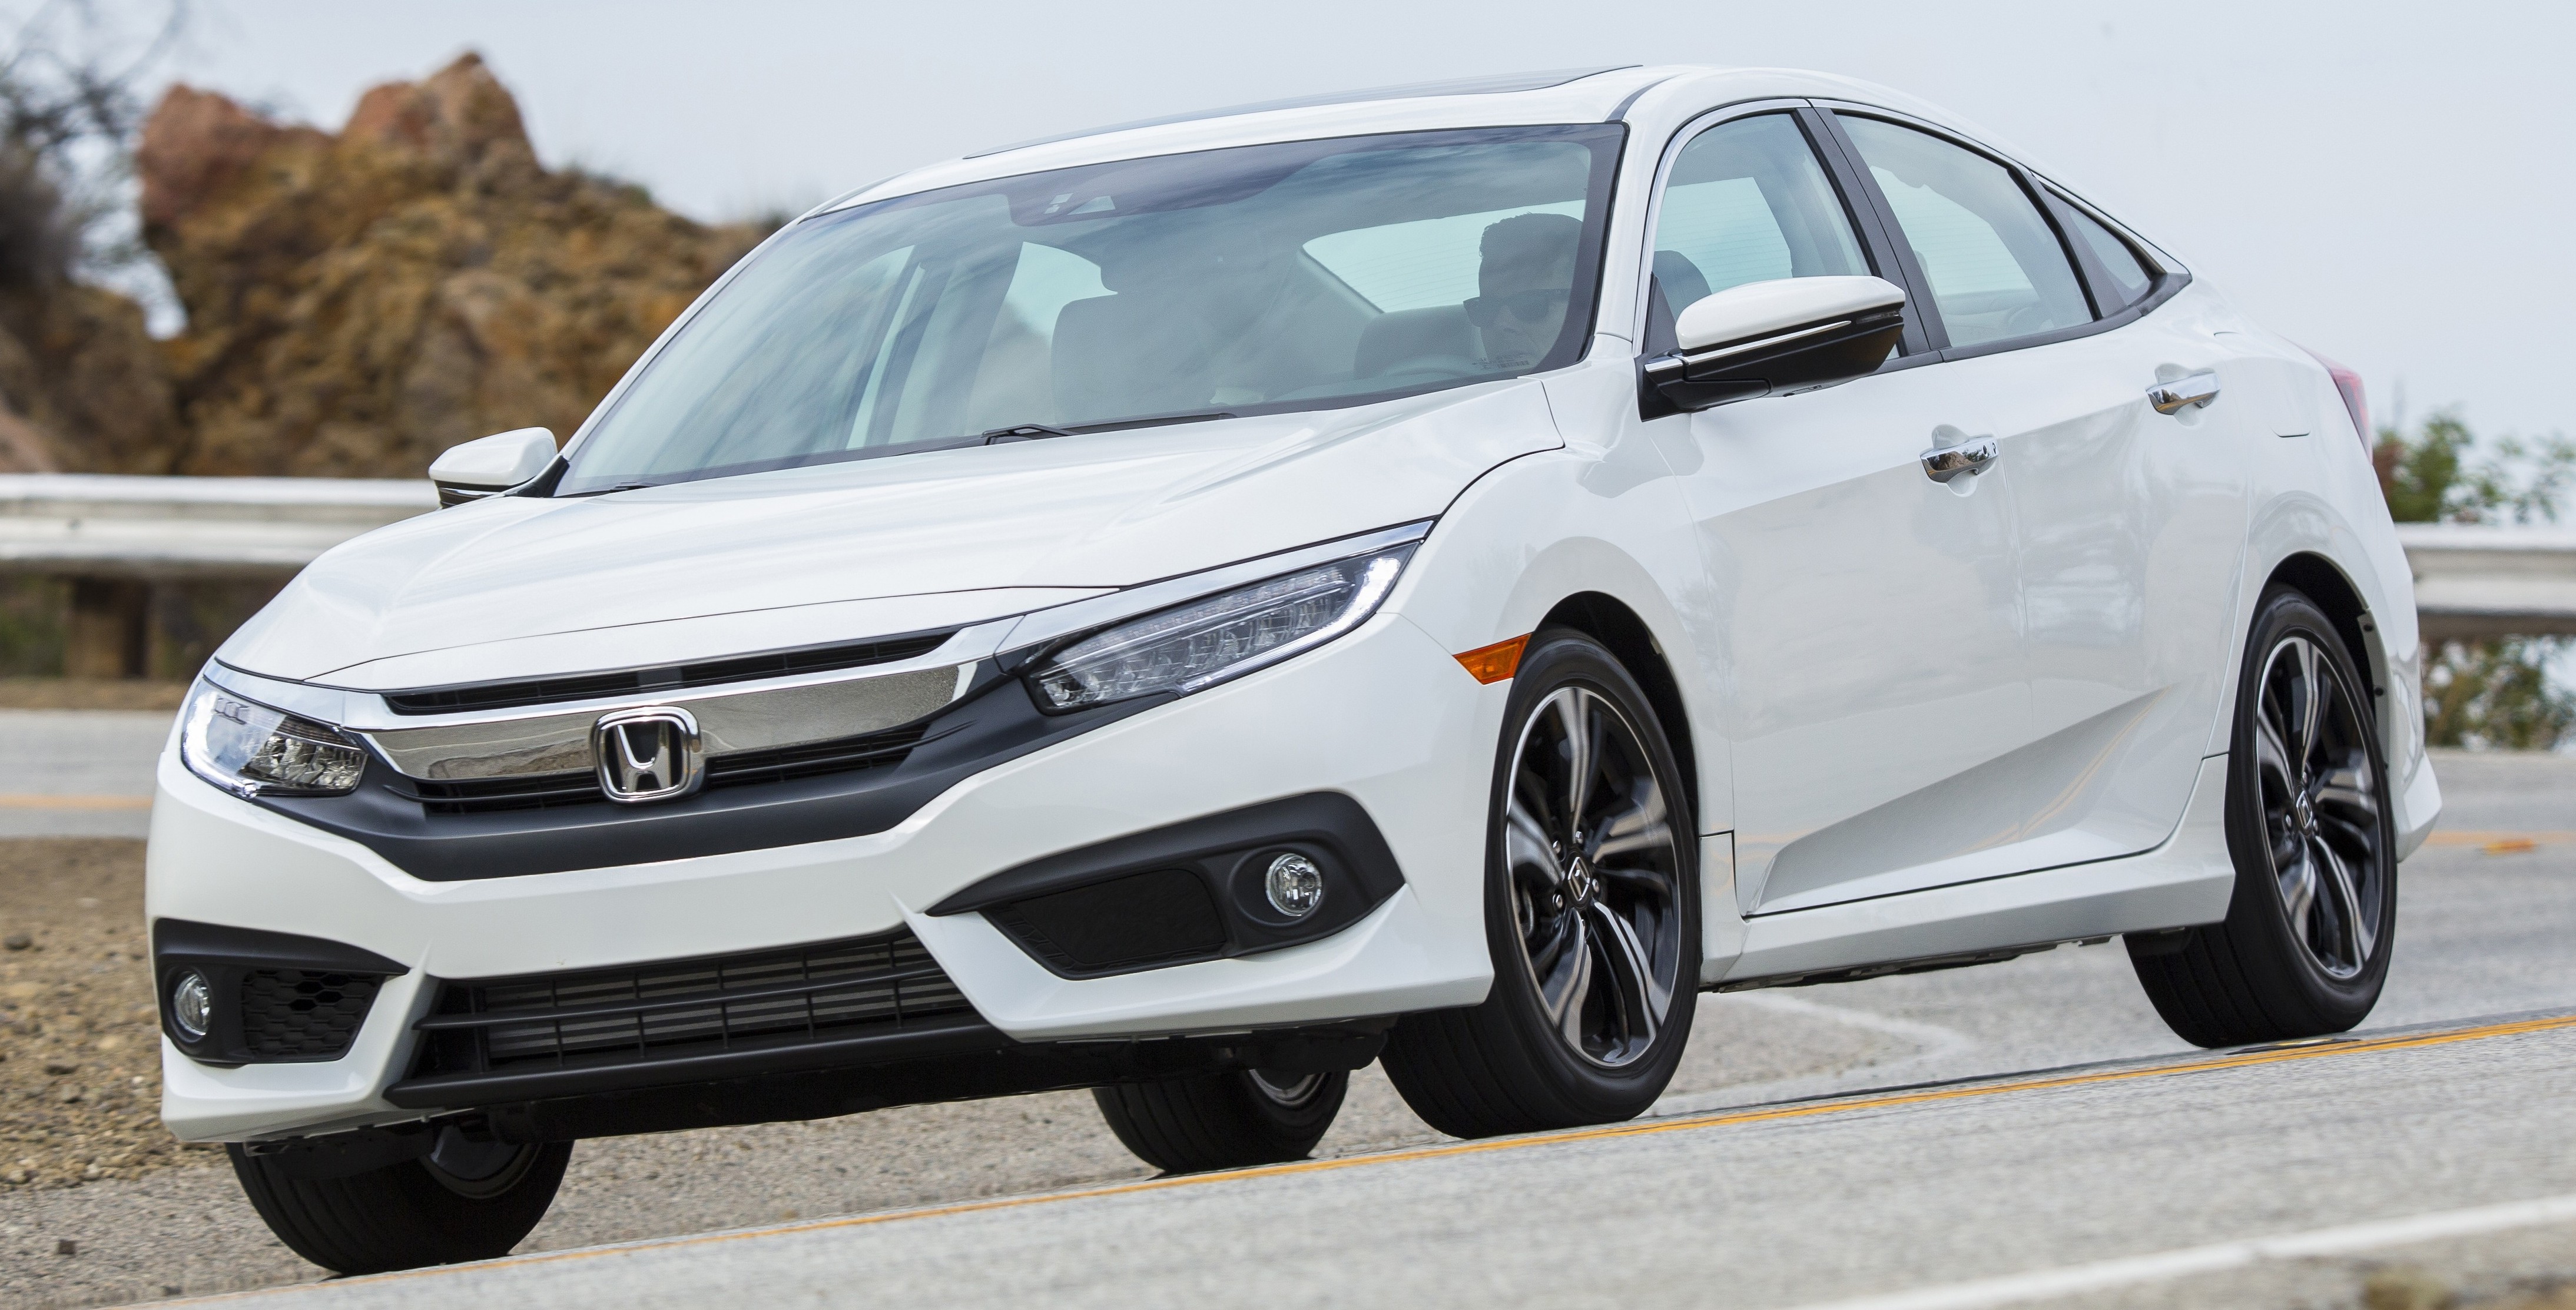 2017 Honda Civic 1 0 And 1 5 Litre Turbo Engines Detailed